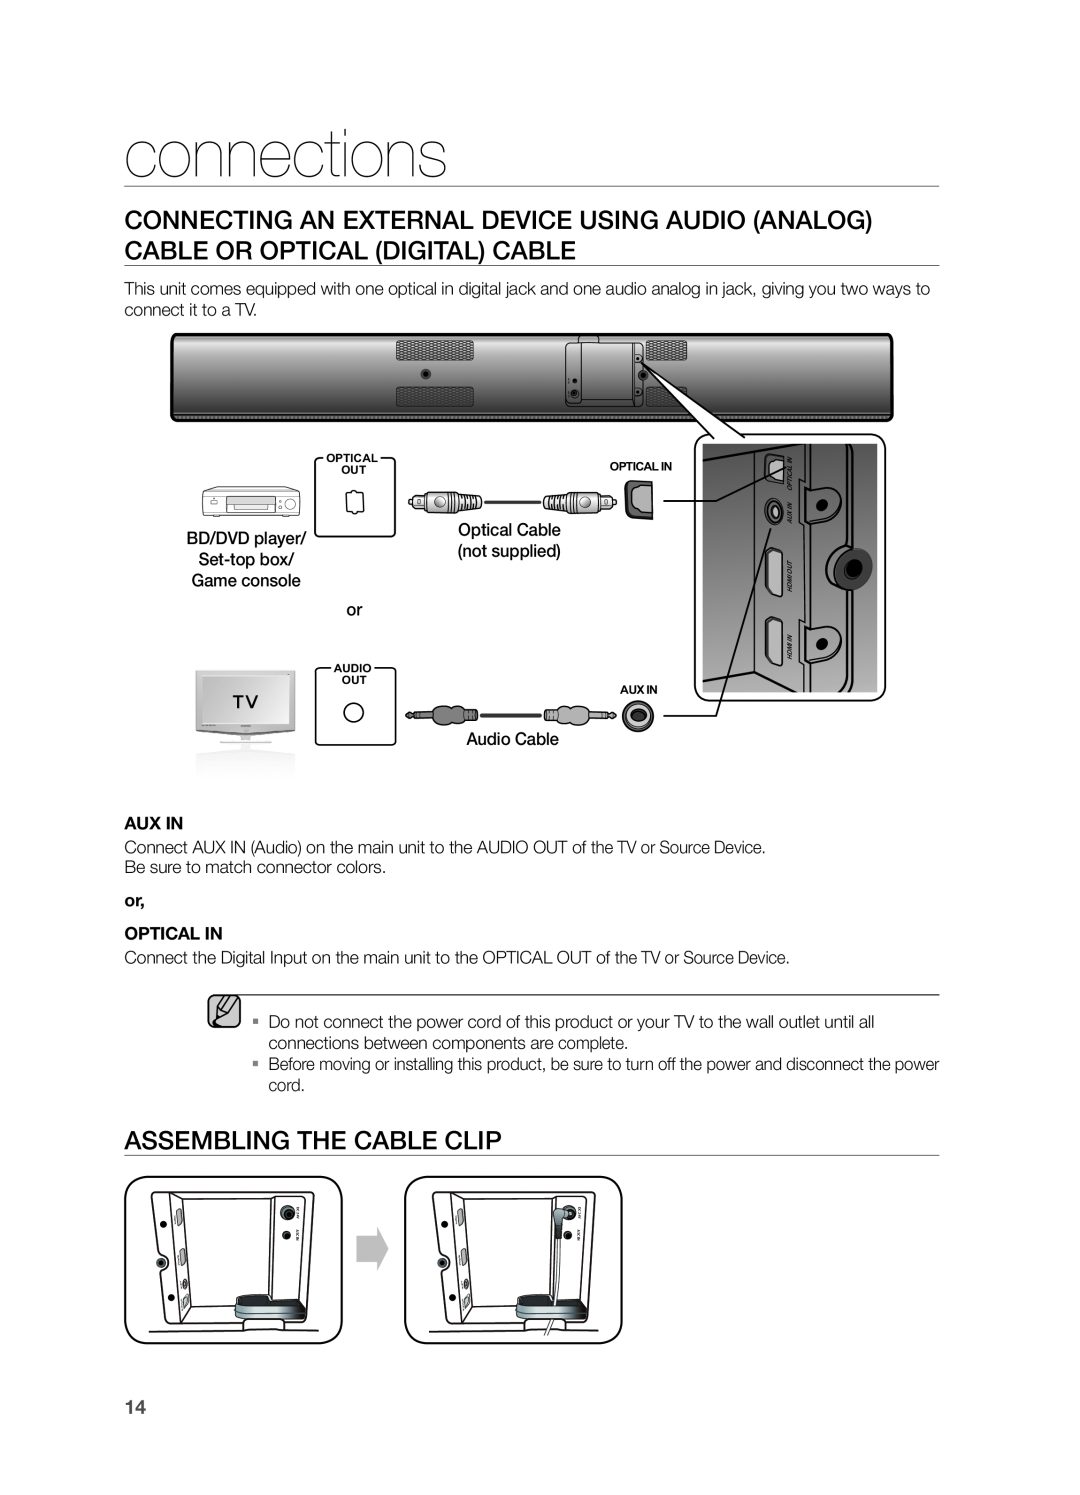 Samsung HWF750ZA Assembling the Cable clip, connections, Optical Cable, not supplied, Set-topbox, Aux In, or OPTICAL IN 